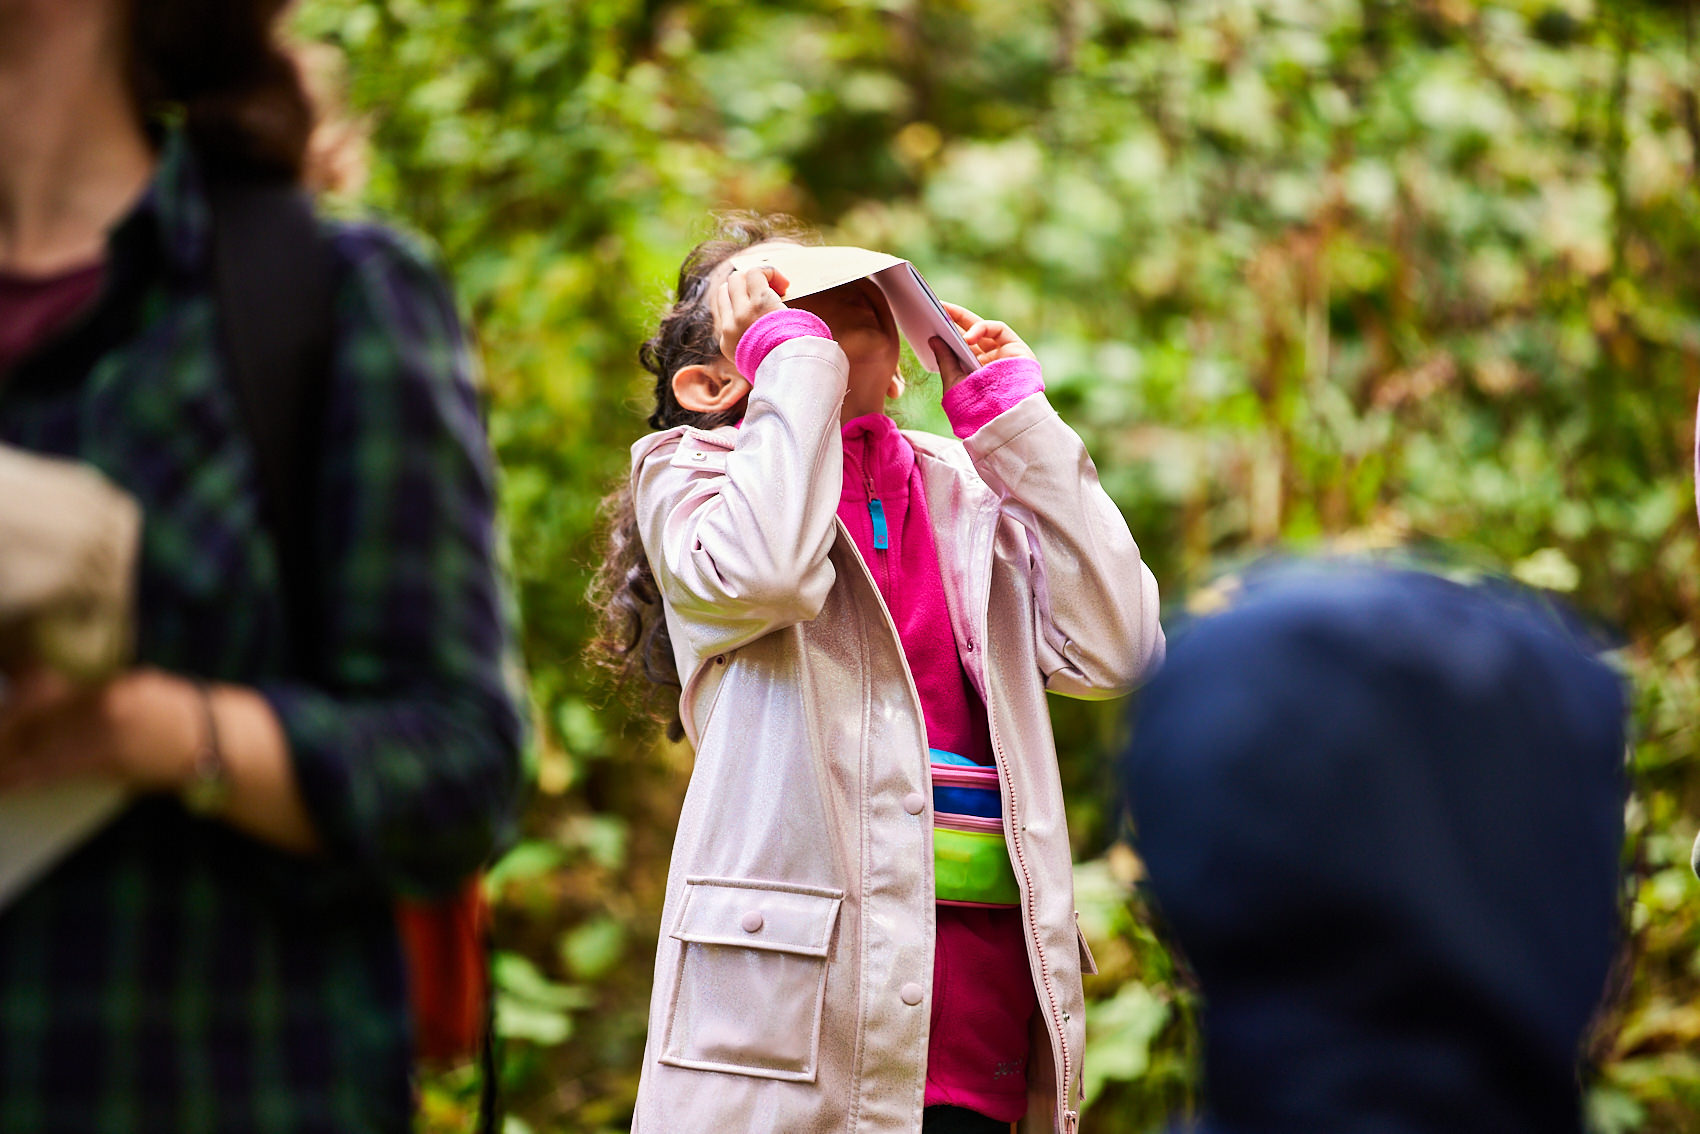 A child wearing a pink rain coat, looking through a paper viewfinder outdoors